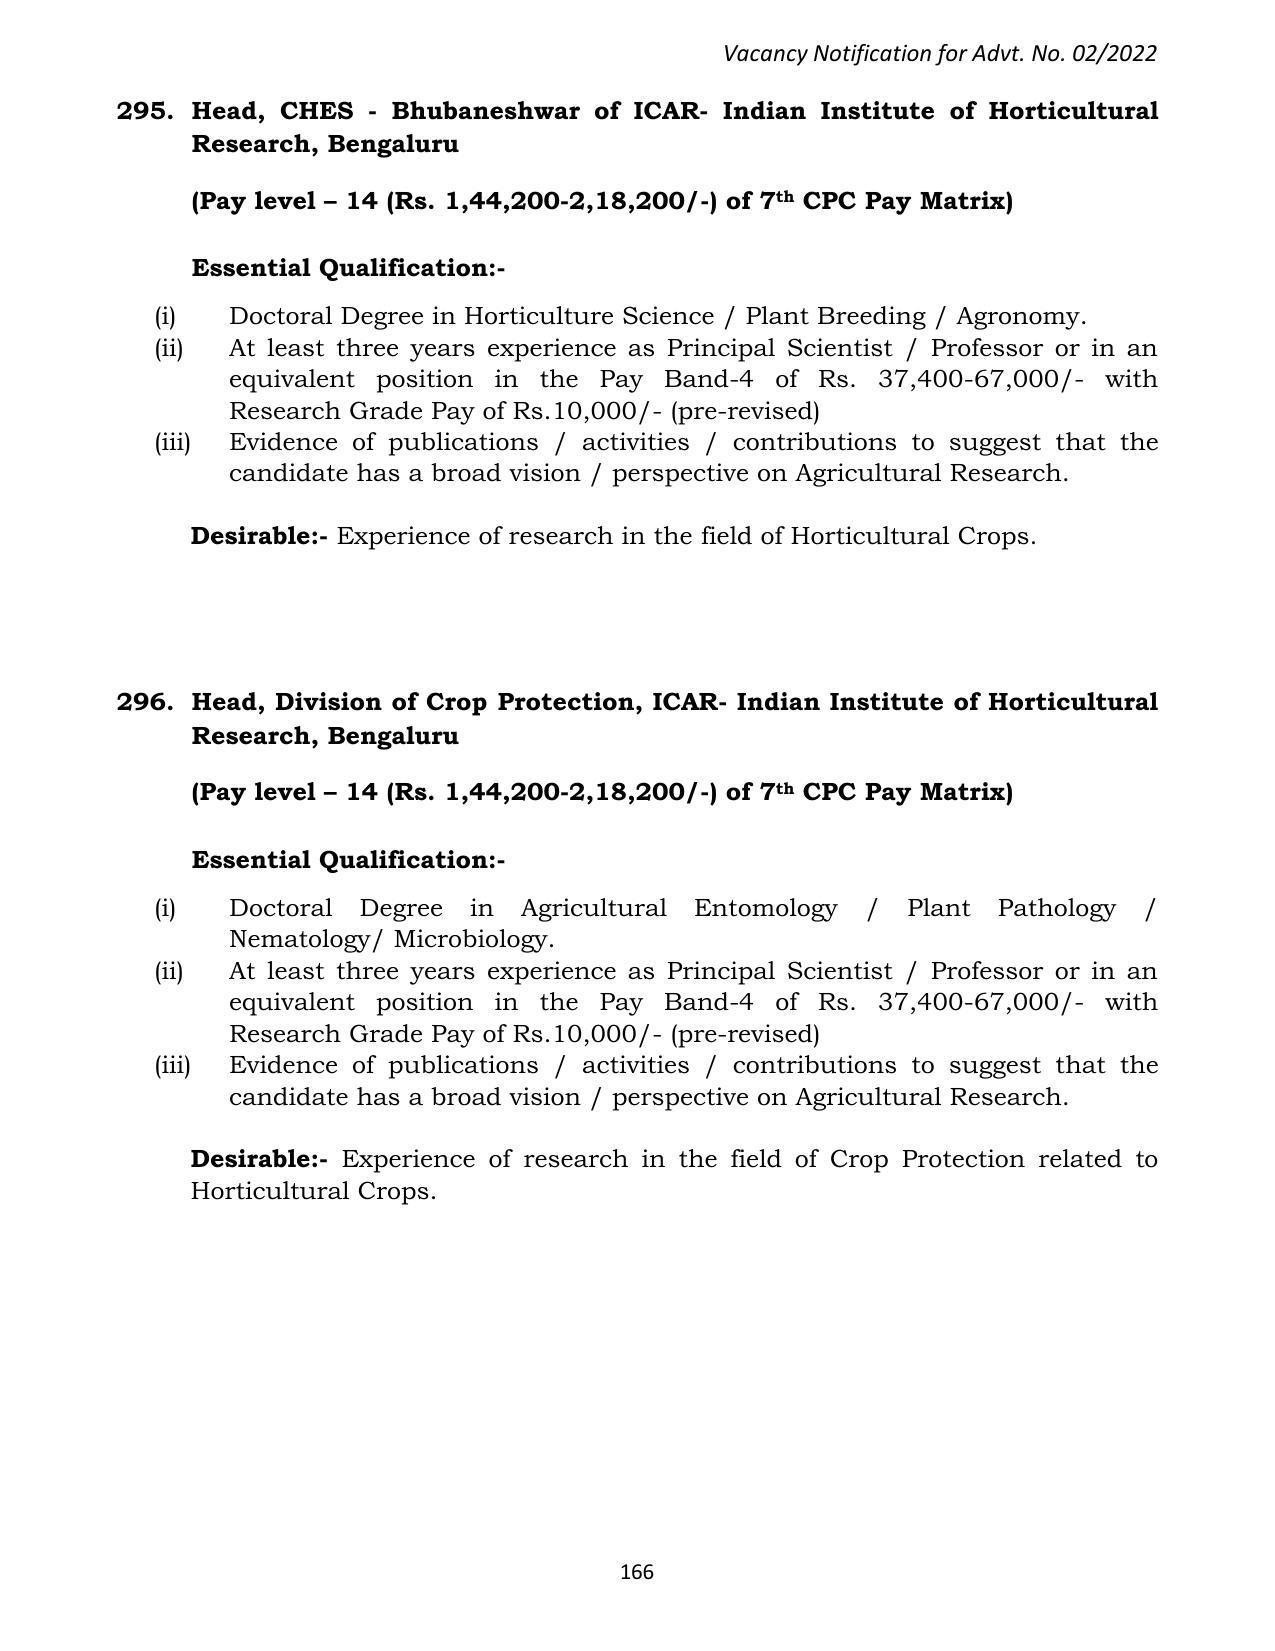 ASRB Non-Research Management Recruitment 2022 - Page 104